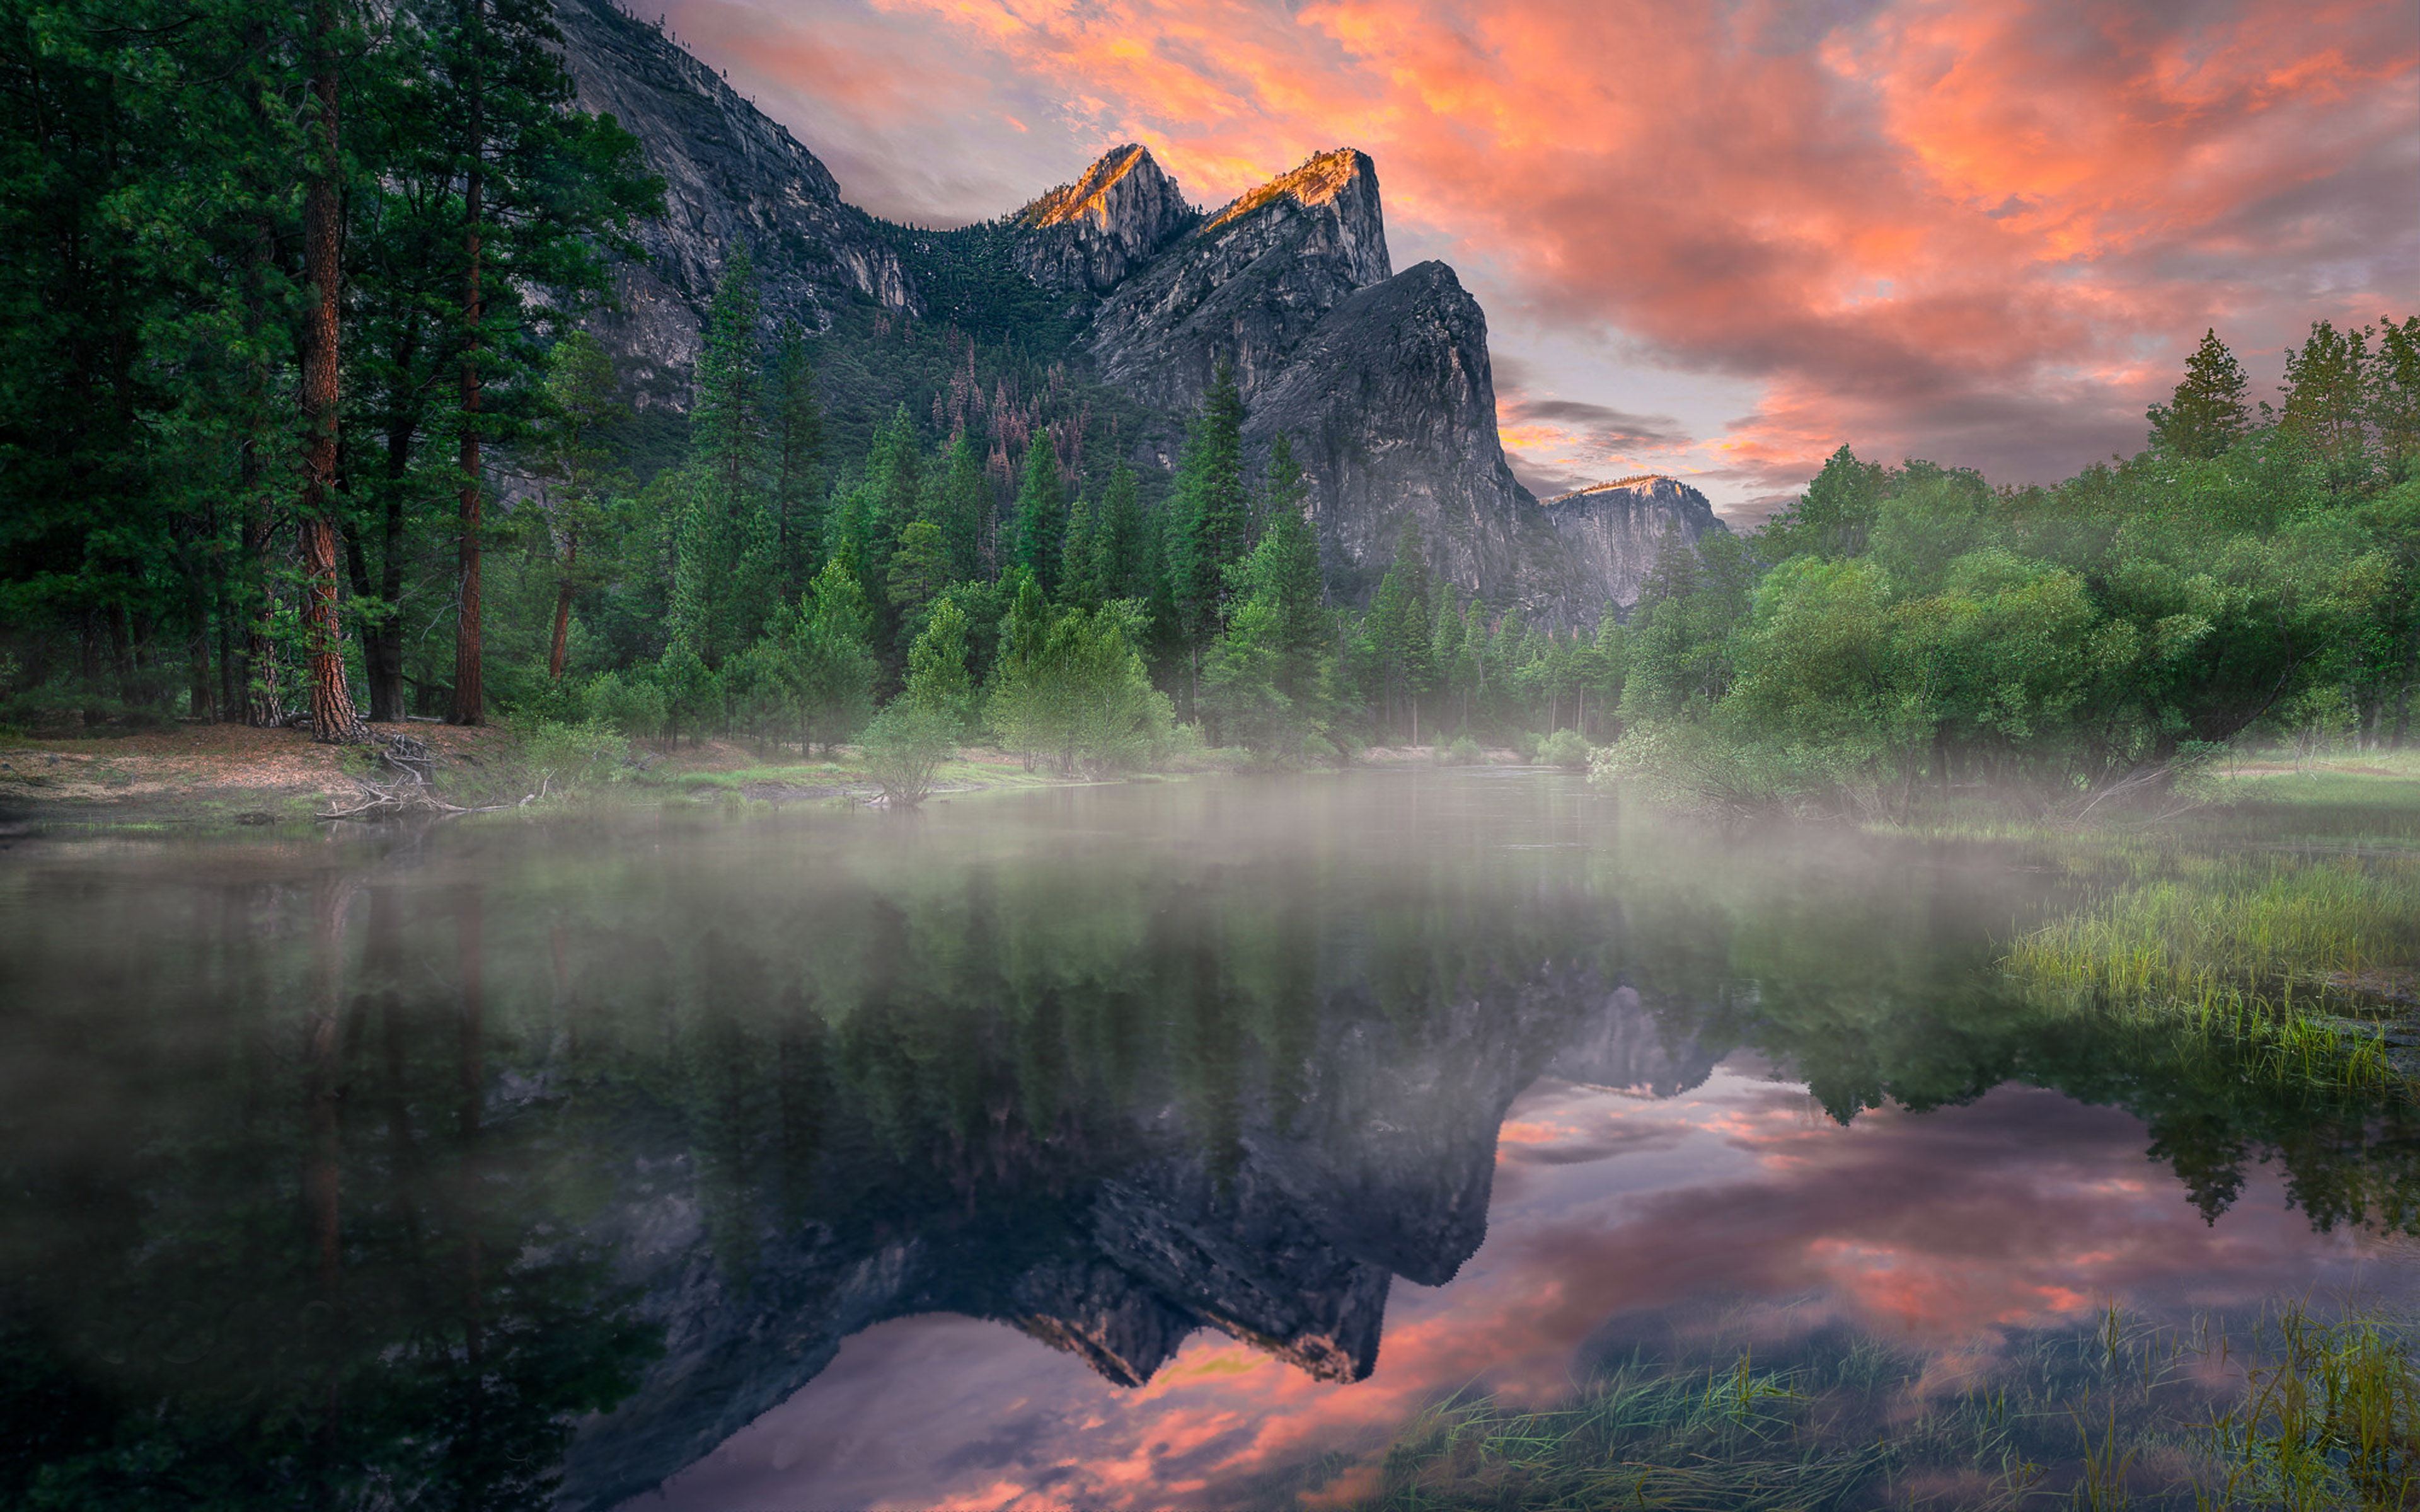 Yosemite Valley Yosemite National Park U.s.three Brothers At Sunset And Reflection In Merced River Landscape Photography Desktop Hd Wallpaper 3840×2400